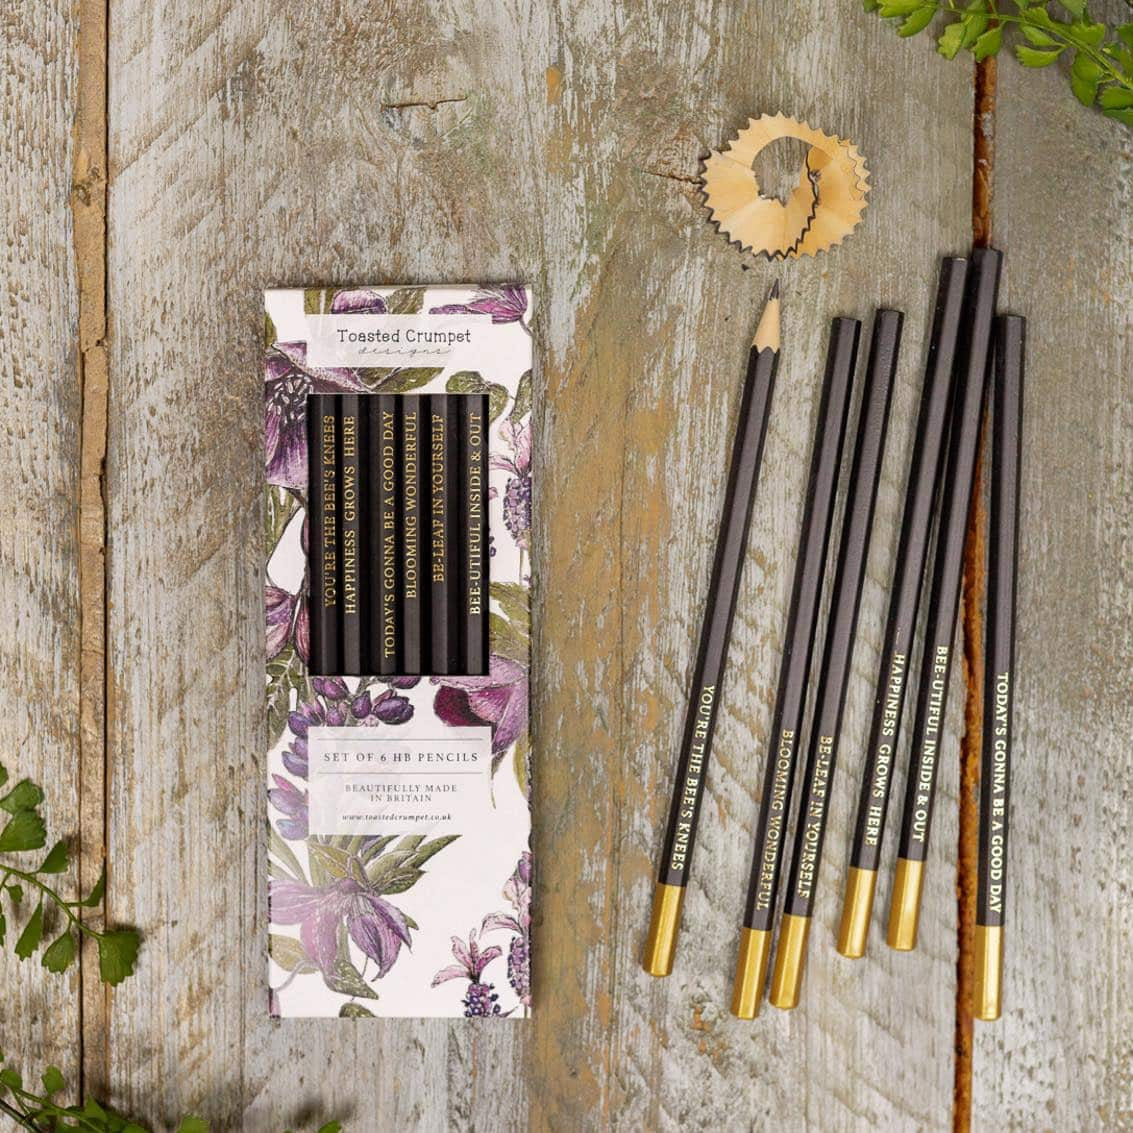 Mulberry Set of 6 Pencils by Toasted Crumpet.